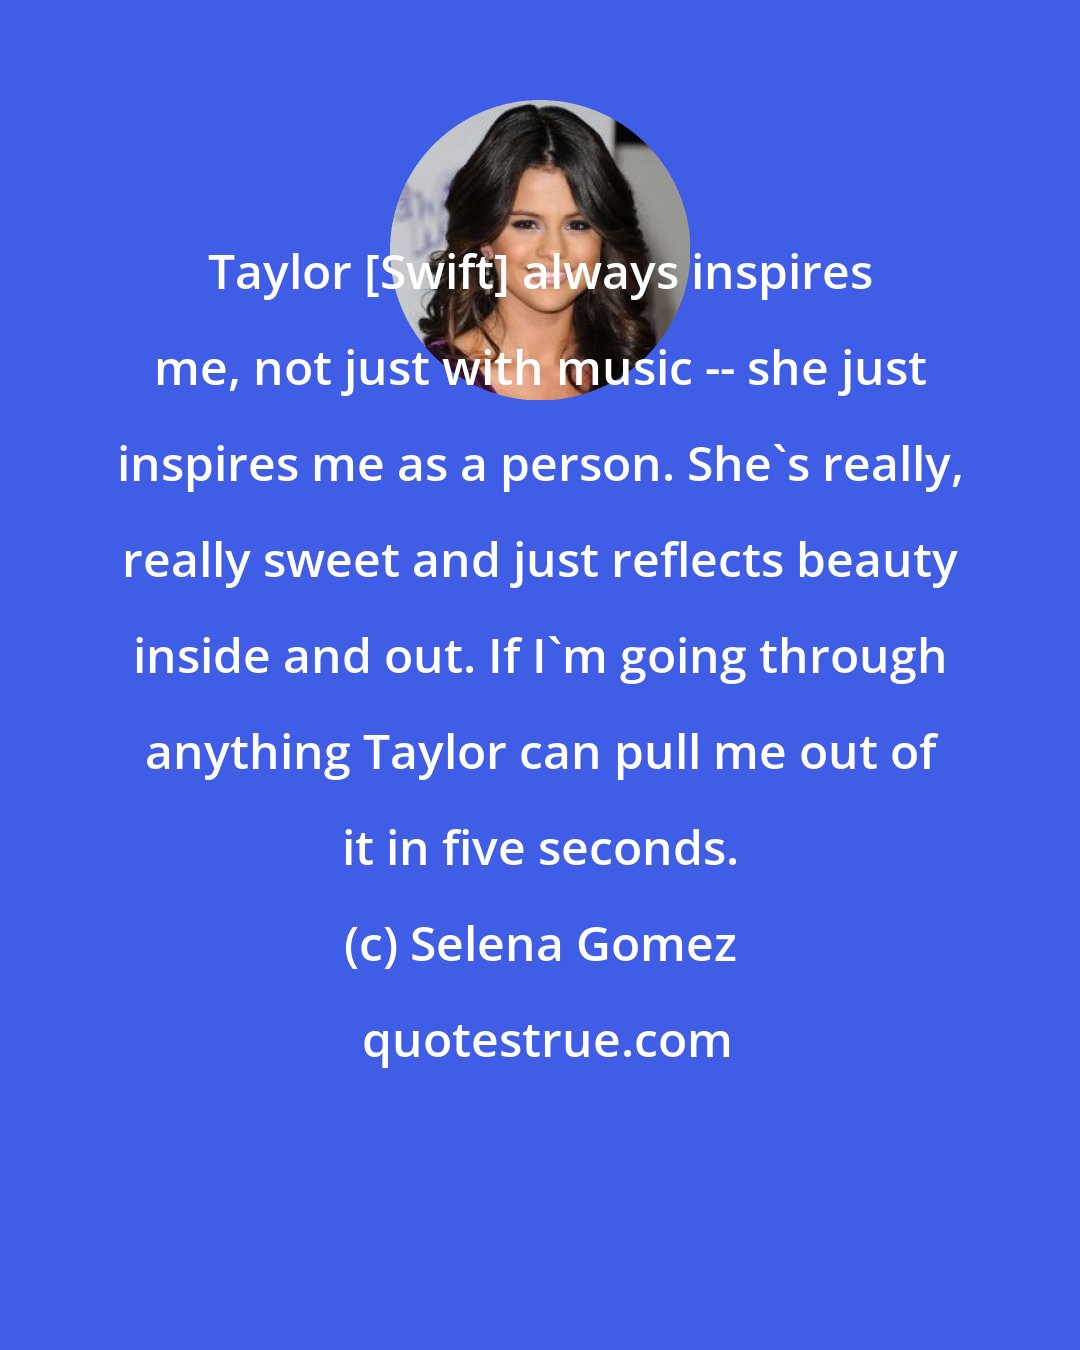 Selena Gomez: Taylor [Swift] always inspires me, not just with music -- she just inspires me as a person. She's really, really sweet and just reflects beauty inside and out. If I'm going through anything Taylor can pull me out of it in five seconds.